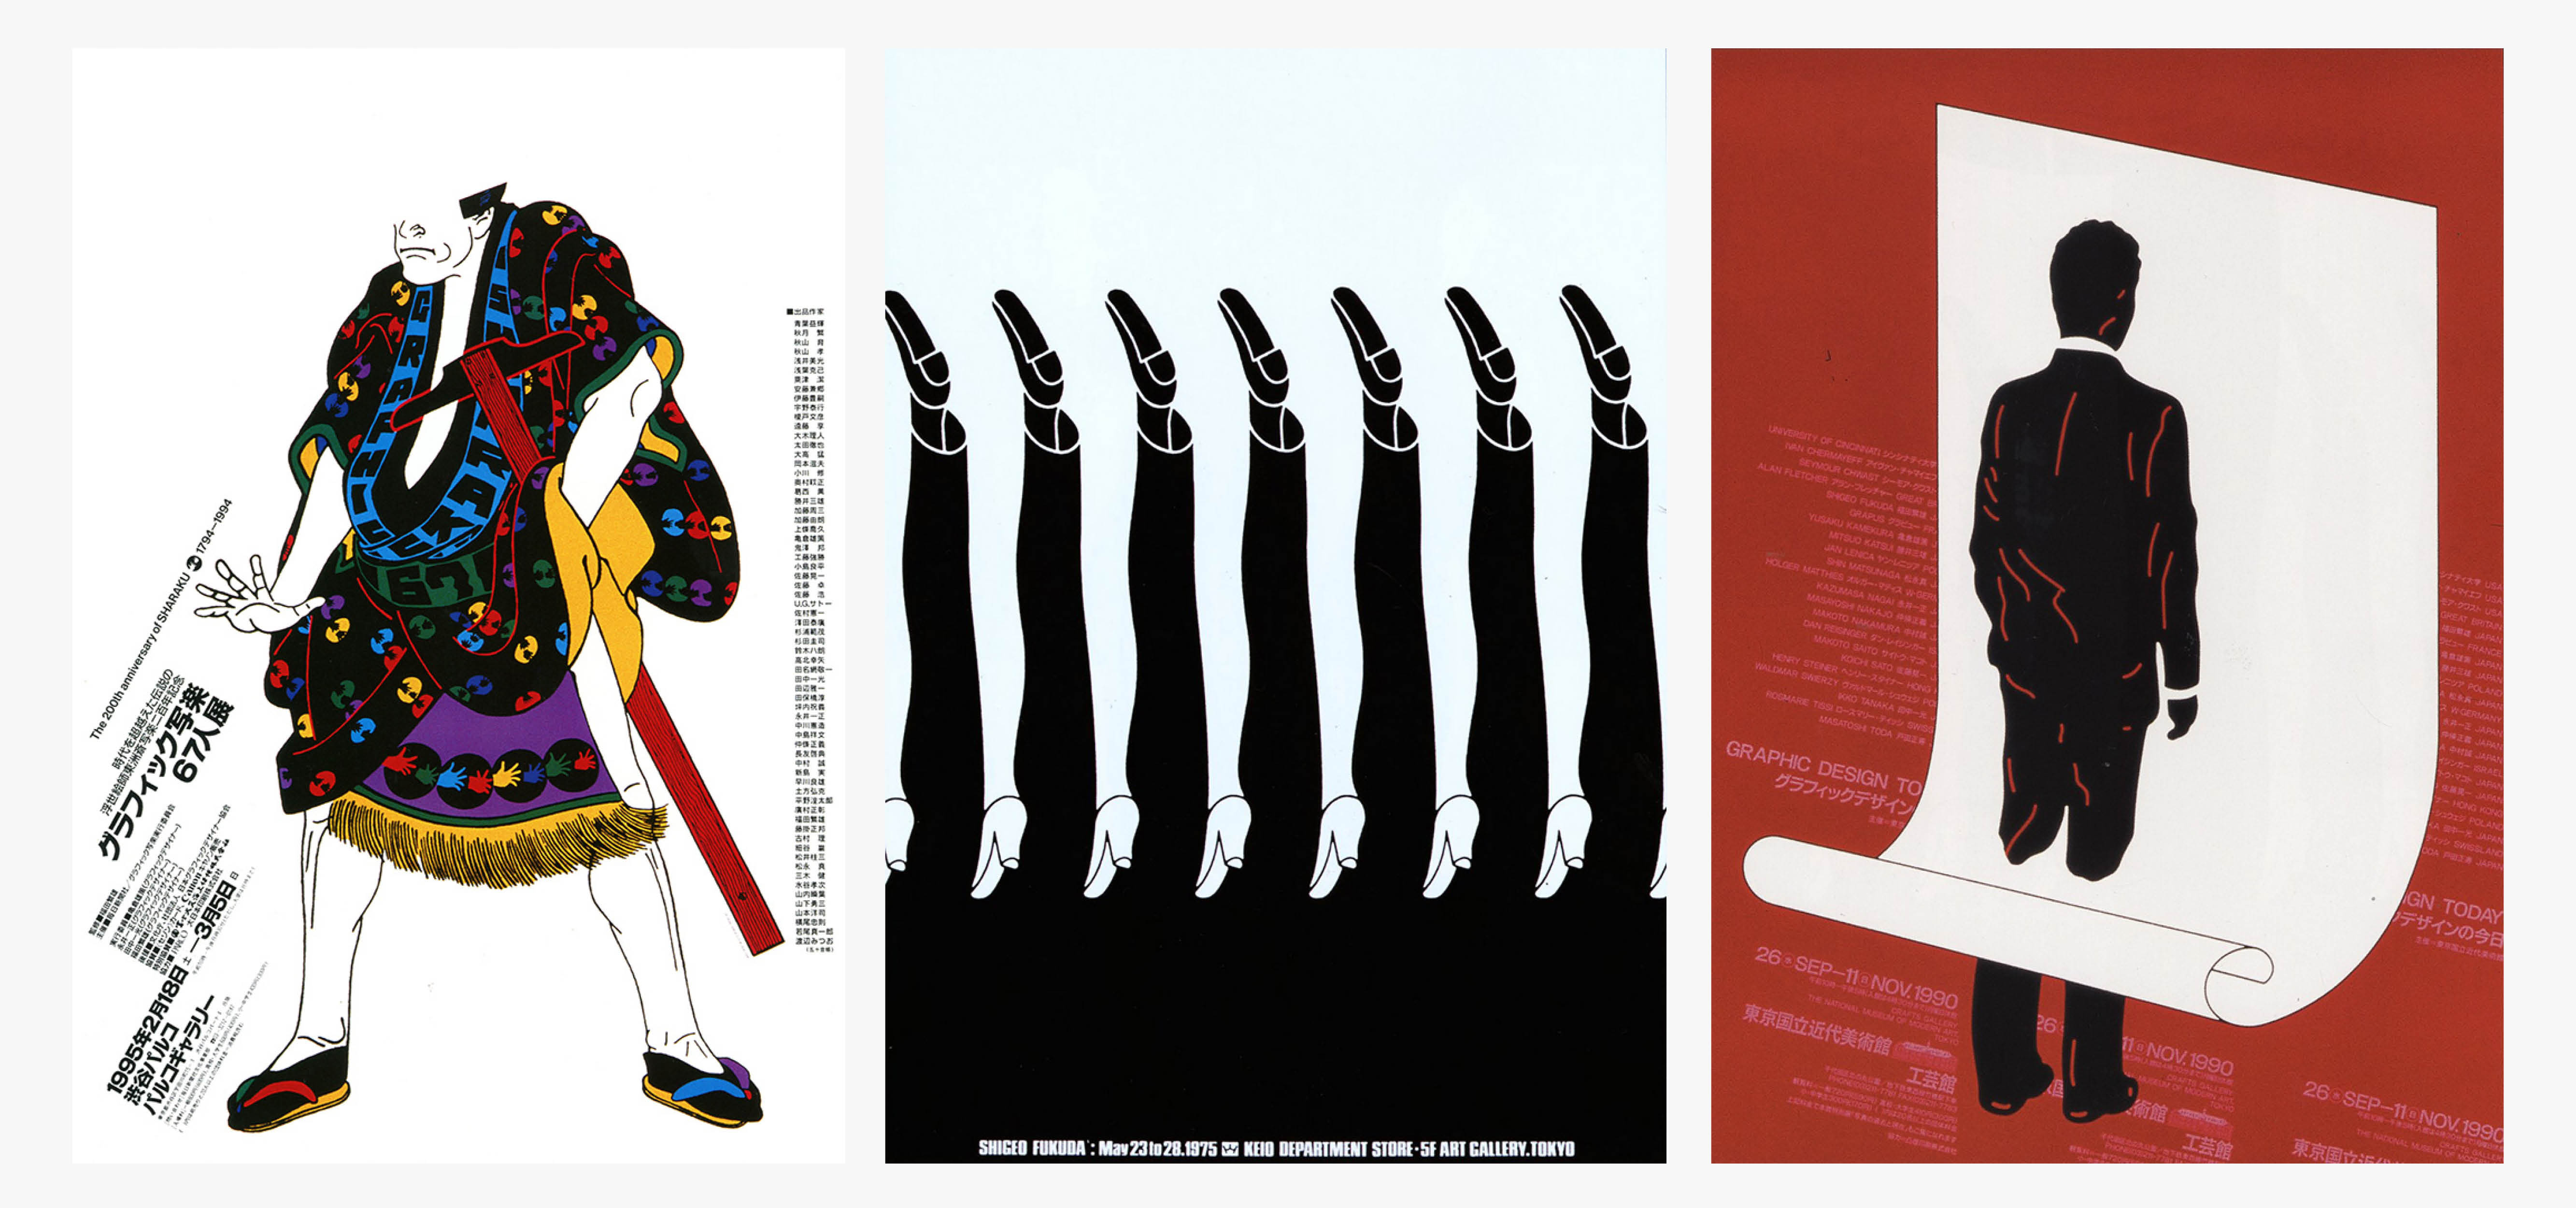 Shigeo Fukuda is best known for his graphic illusion designed in a linear style.